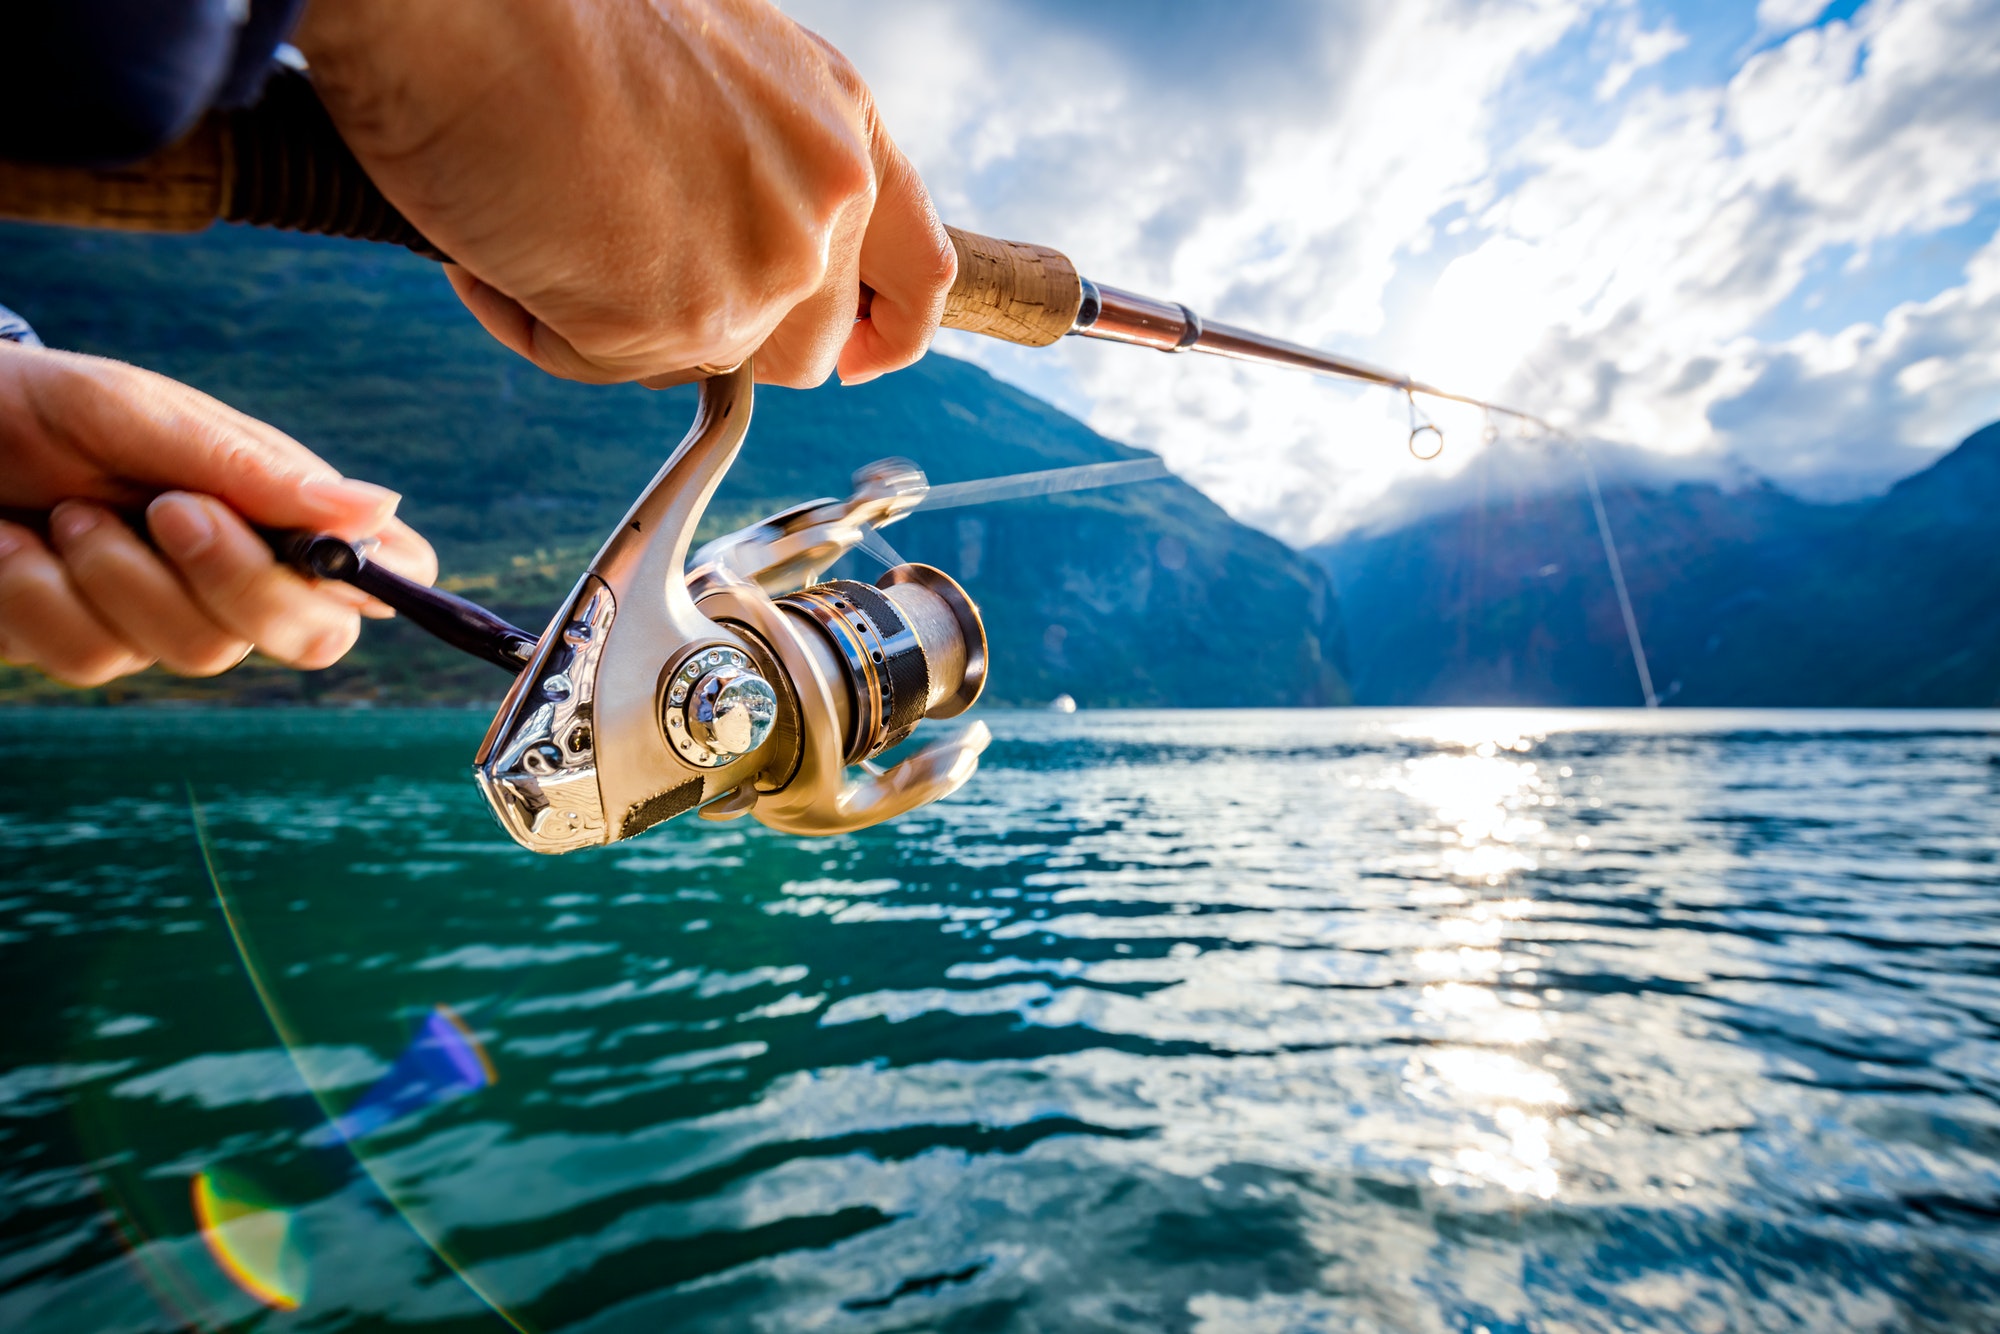 High Tech Fishing – Good or Bad For the Sport?